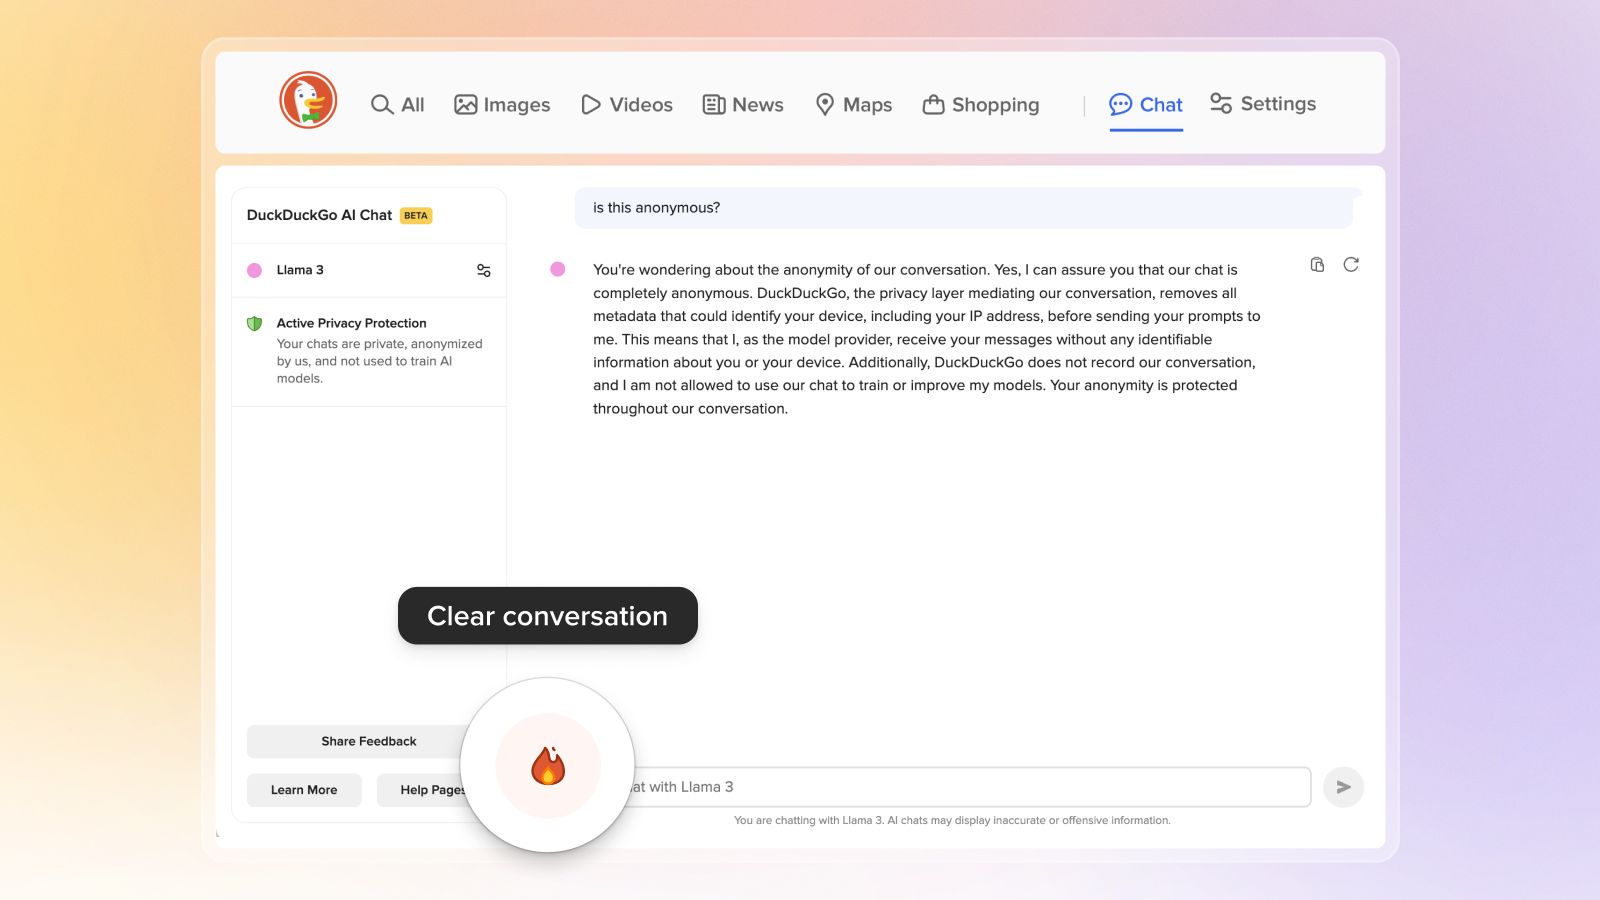 ai chat screen with query "is this anonymous," highlighting fire button